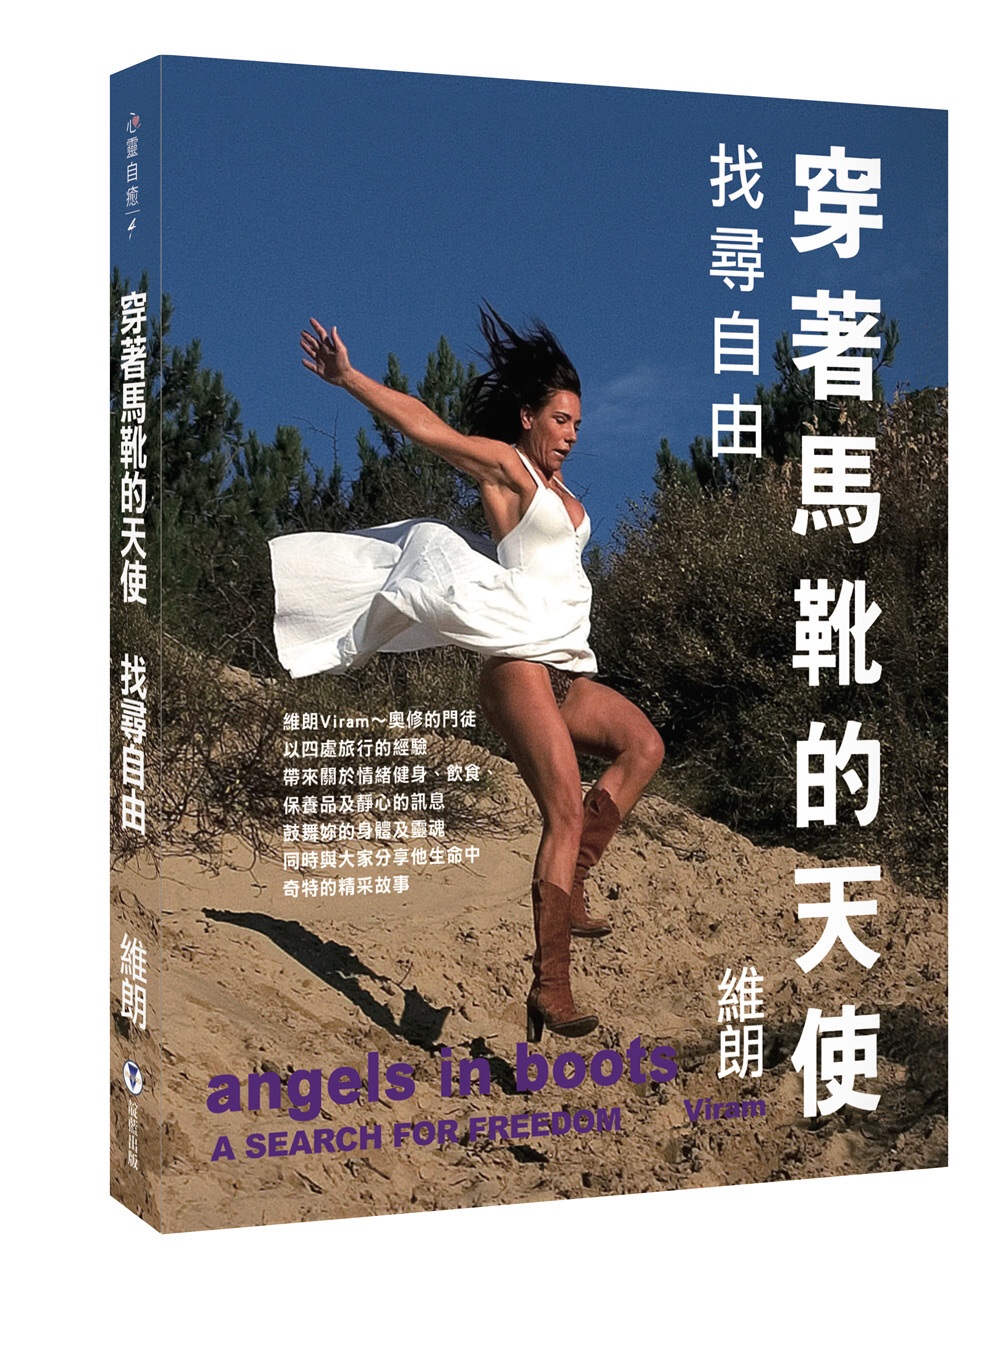 angels in boots：A SEARCH FOR FREEDOM